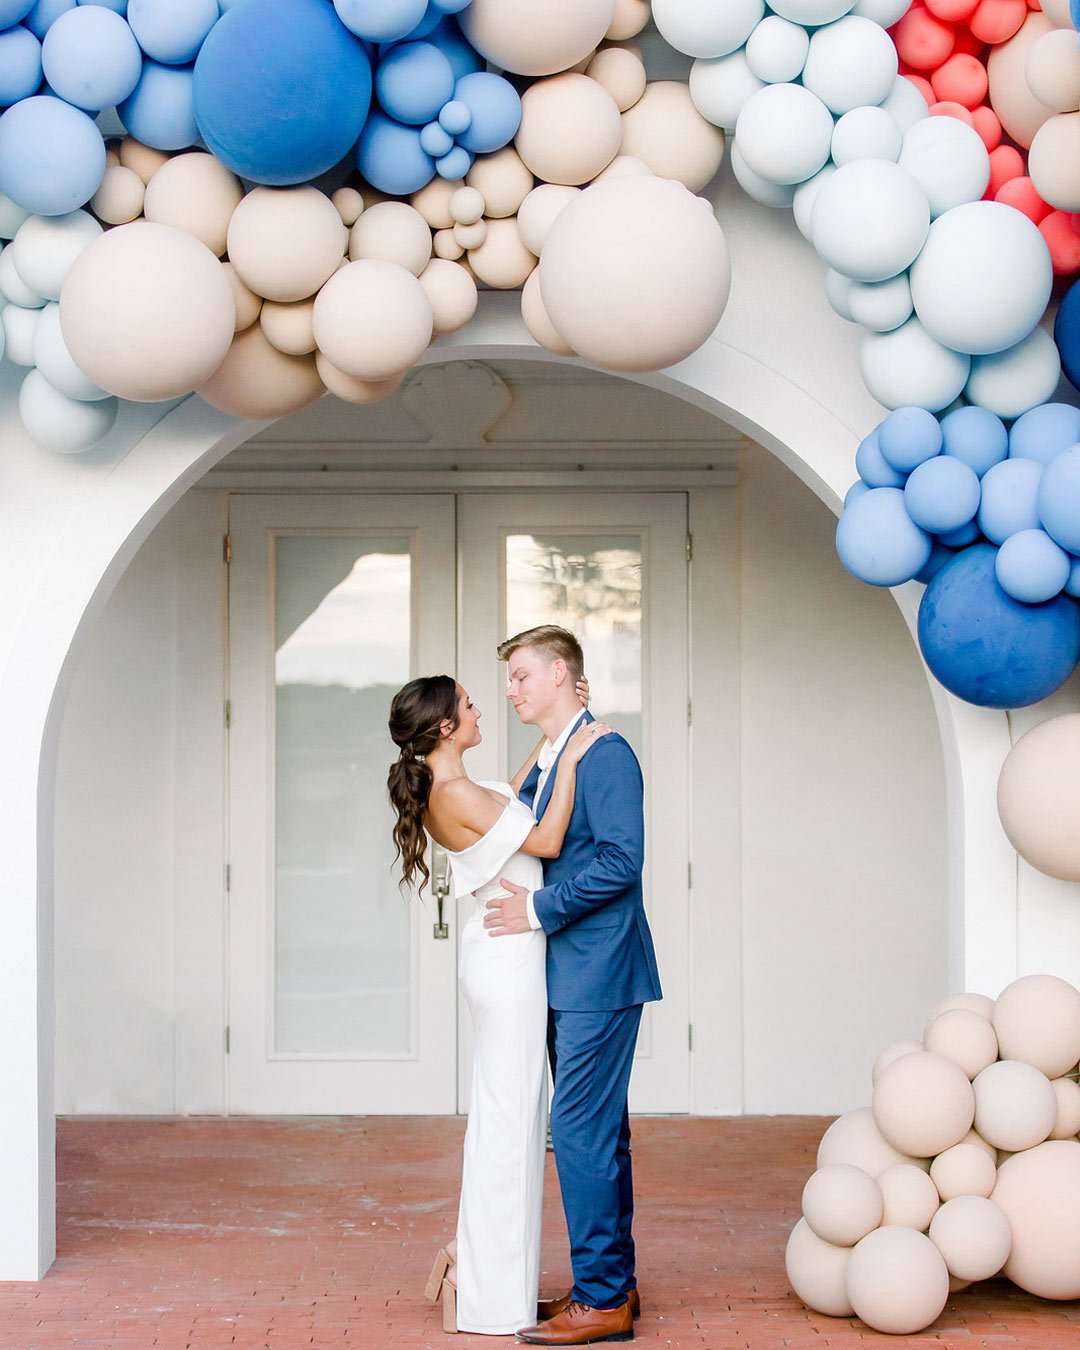 wedding trends baloons arch decor